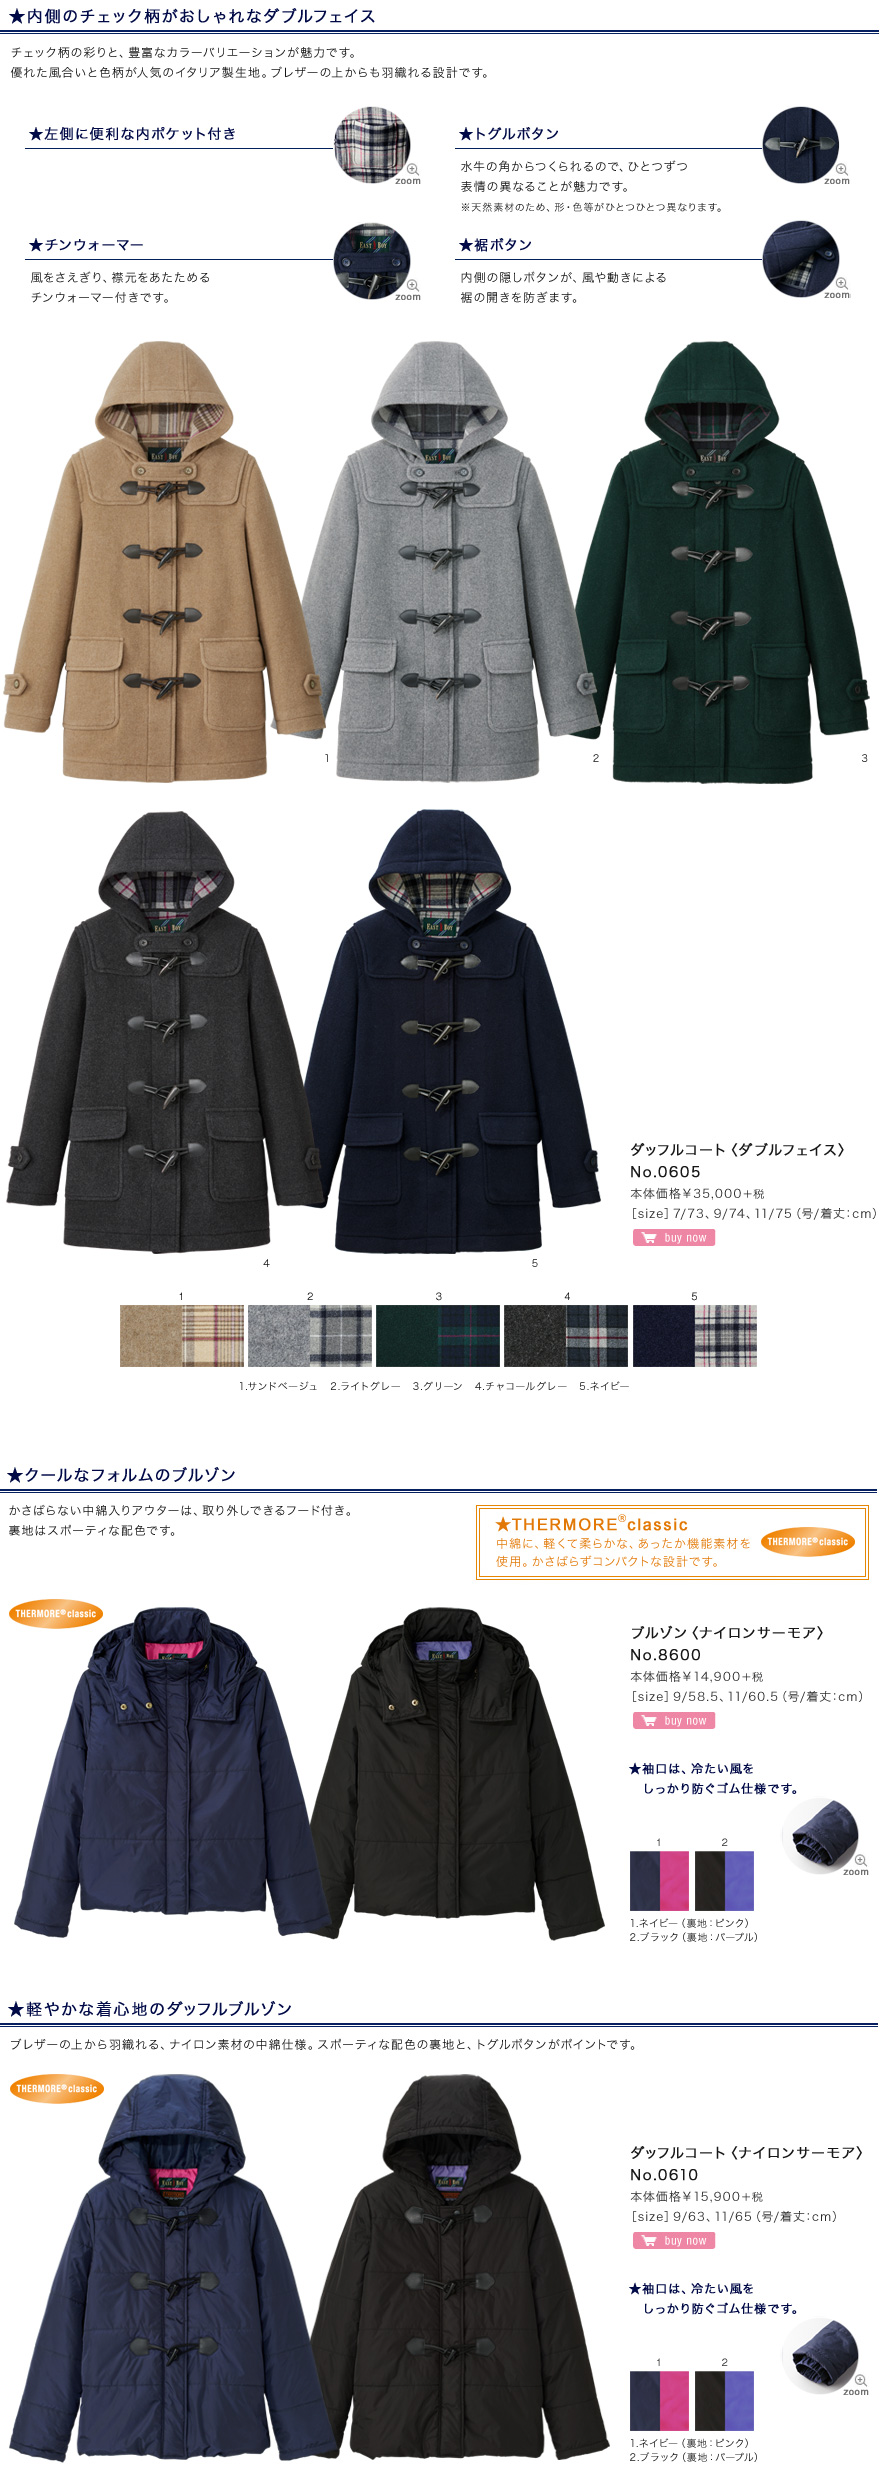 Coat：季節のスクールアイテム｜EASTBOY Official Web Site